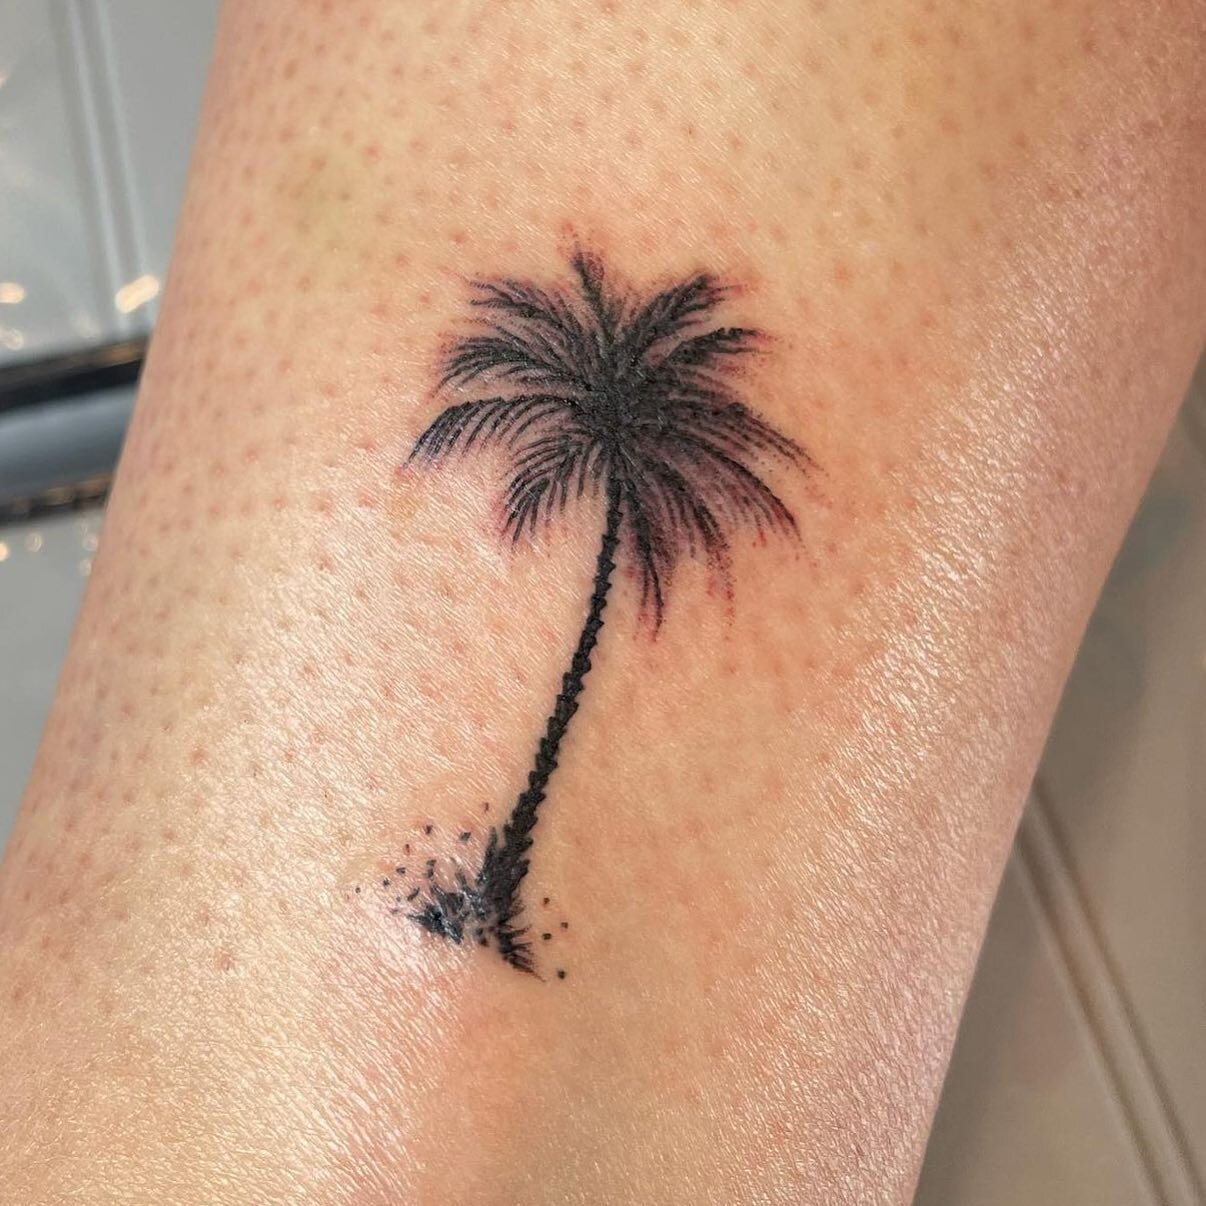 I want to be where the palm trees are 🌴

Artist @ramonpmedeiros